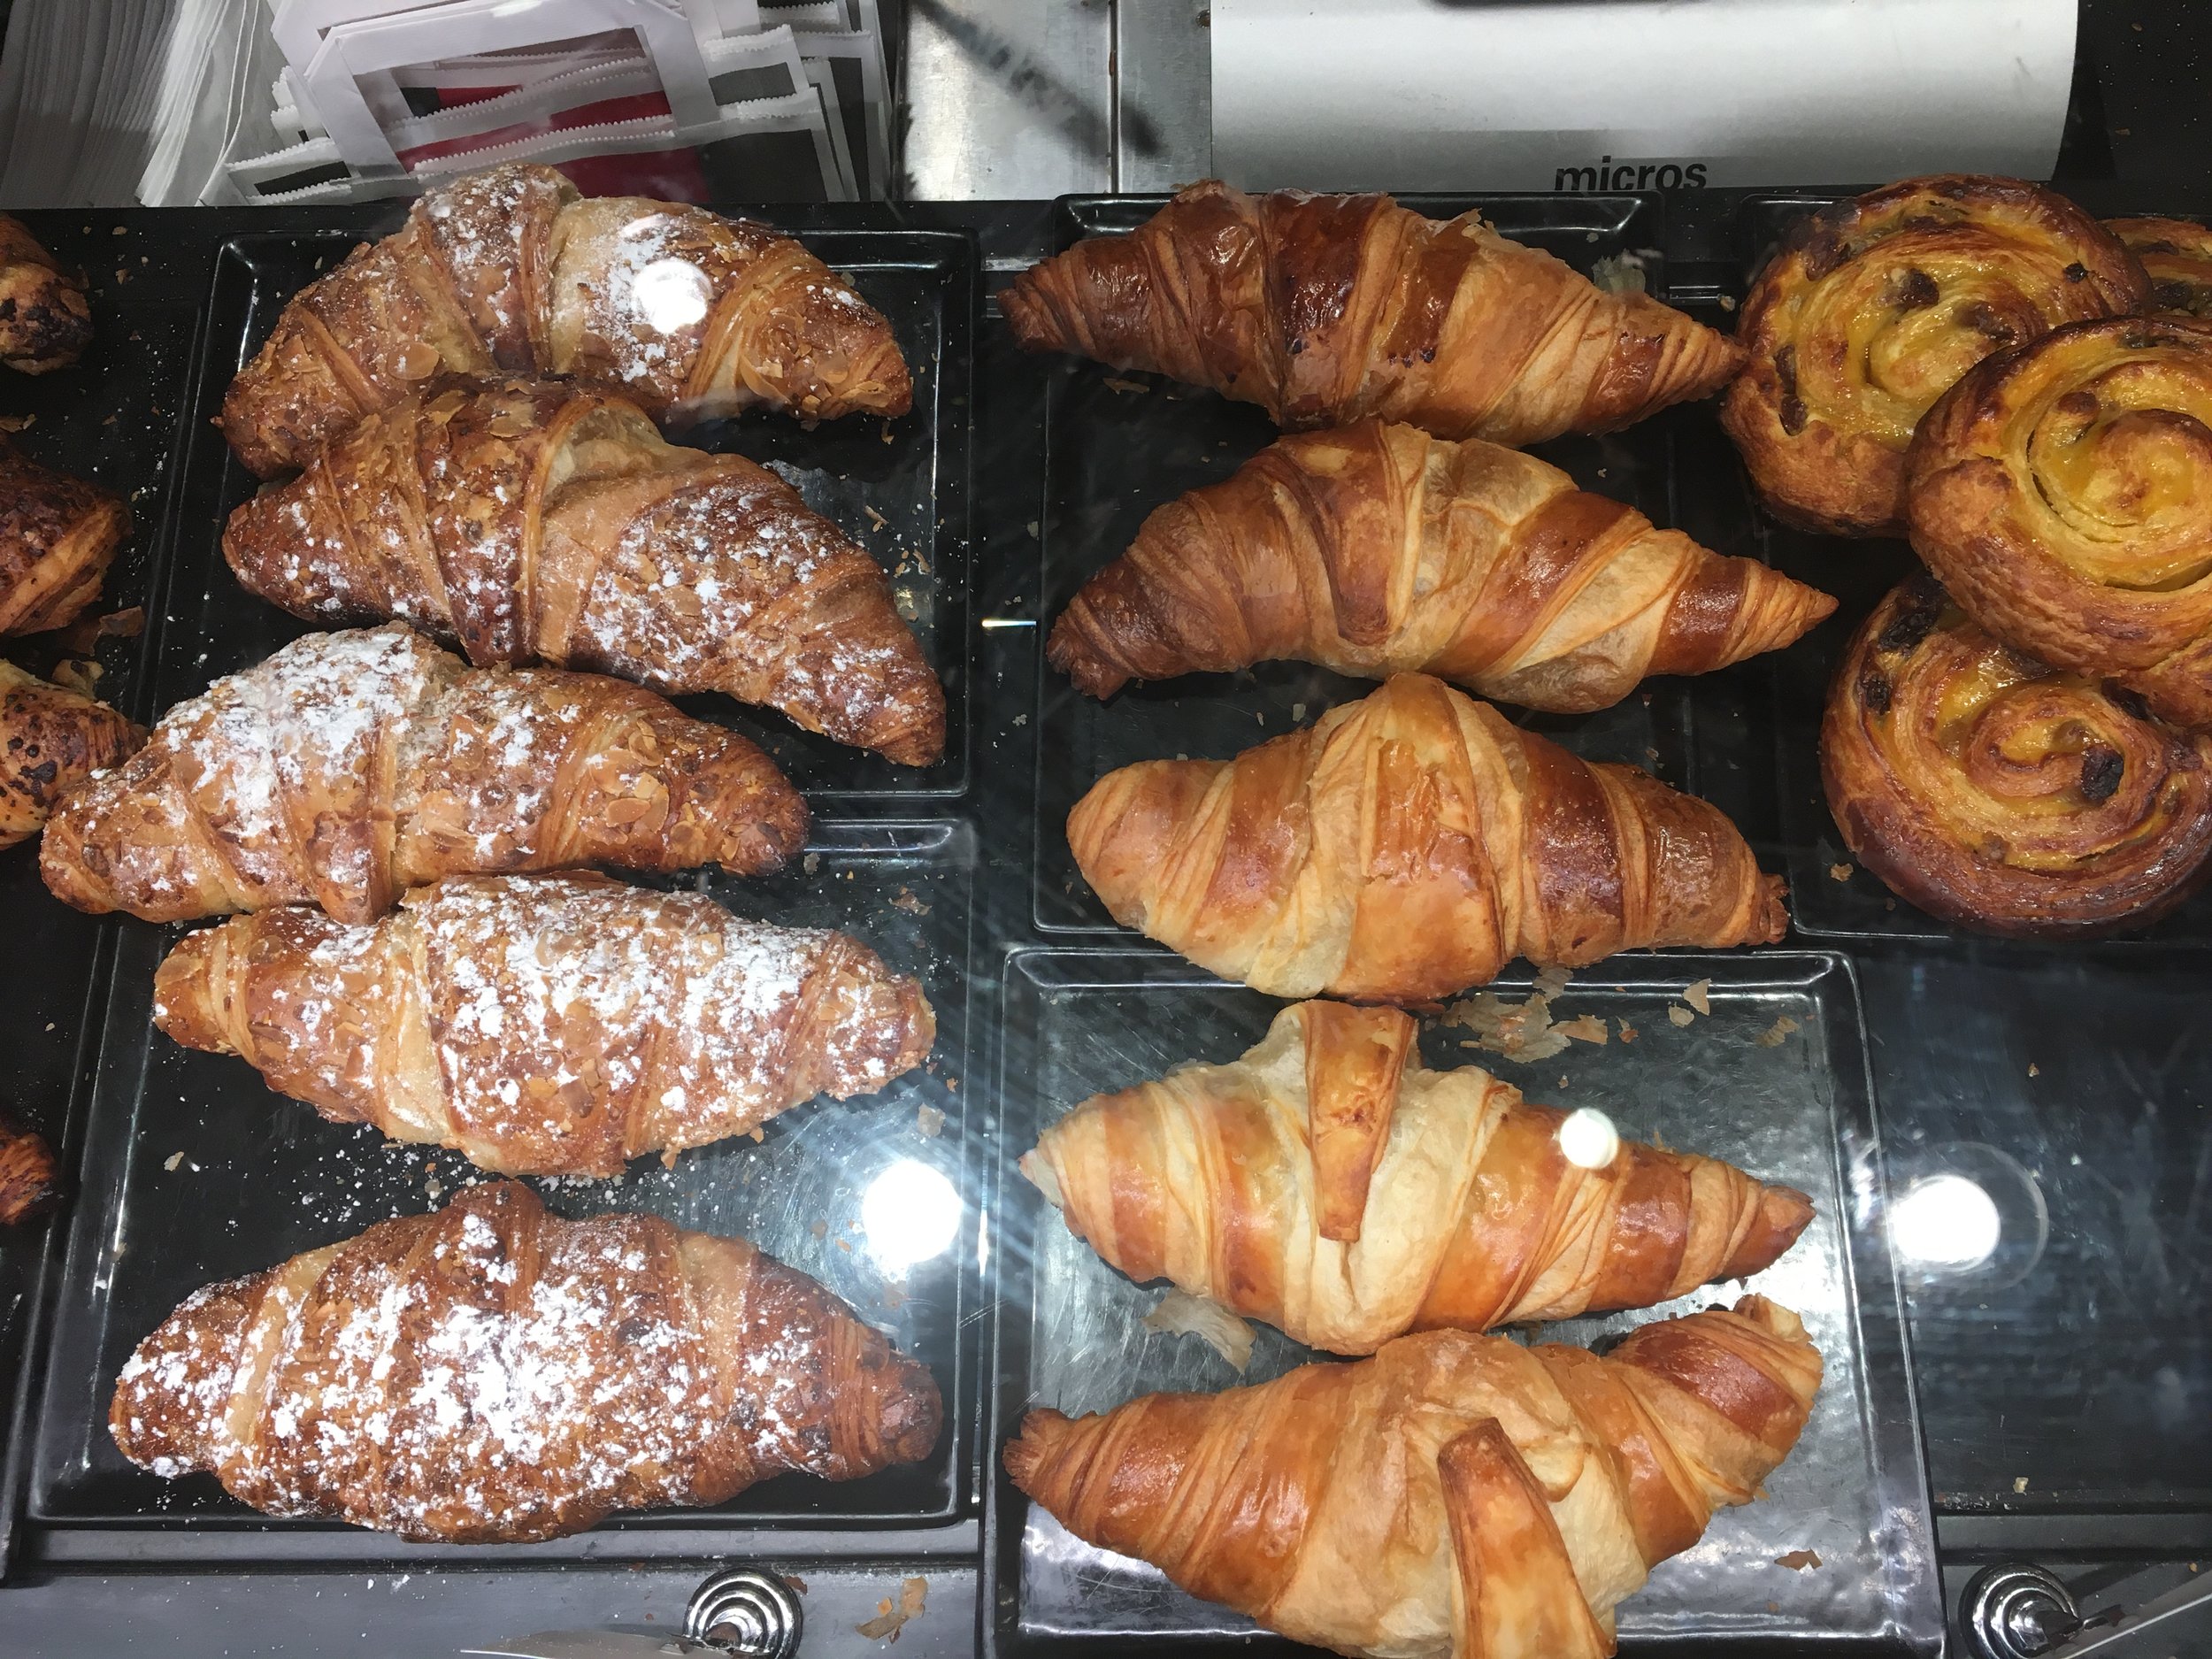 Croissants dusted with sugar and filled with Nutella. Hmmm.